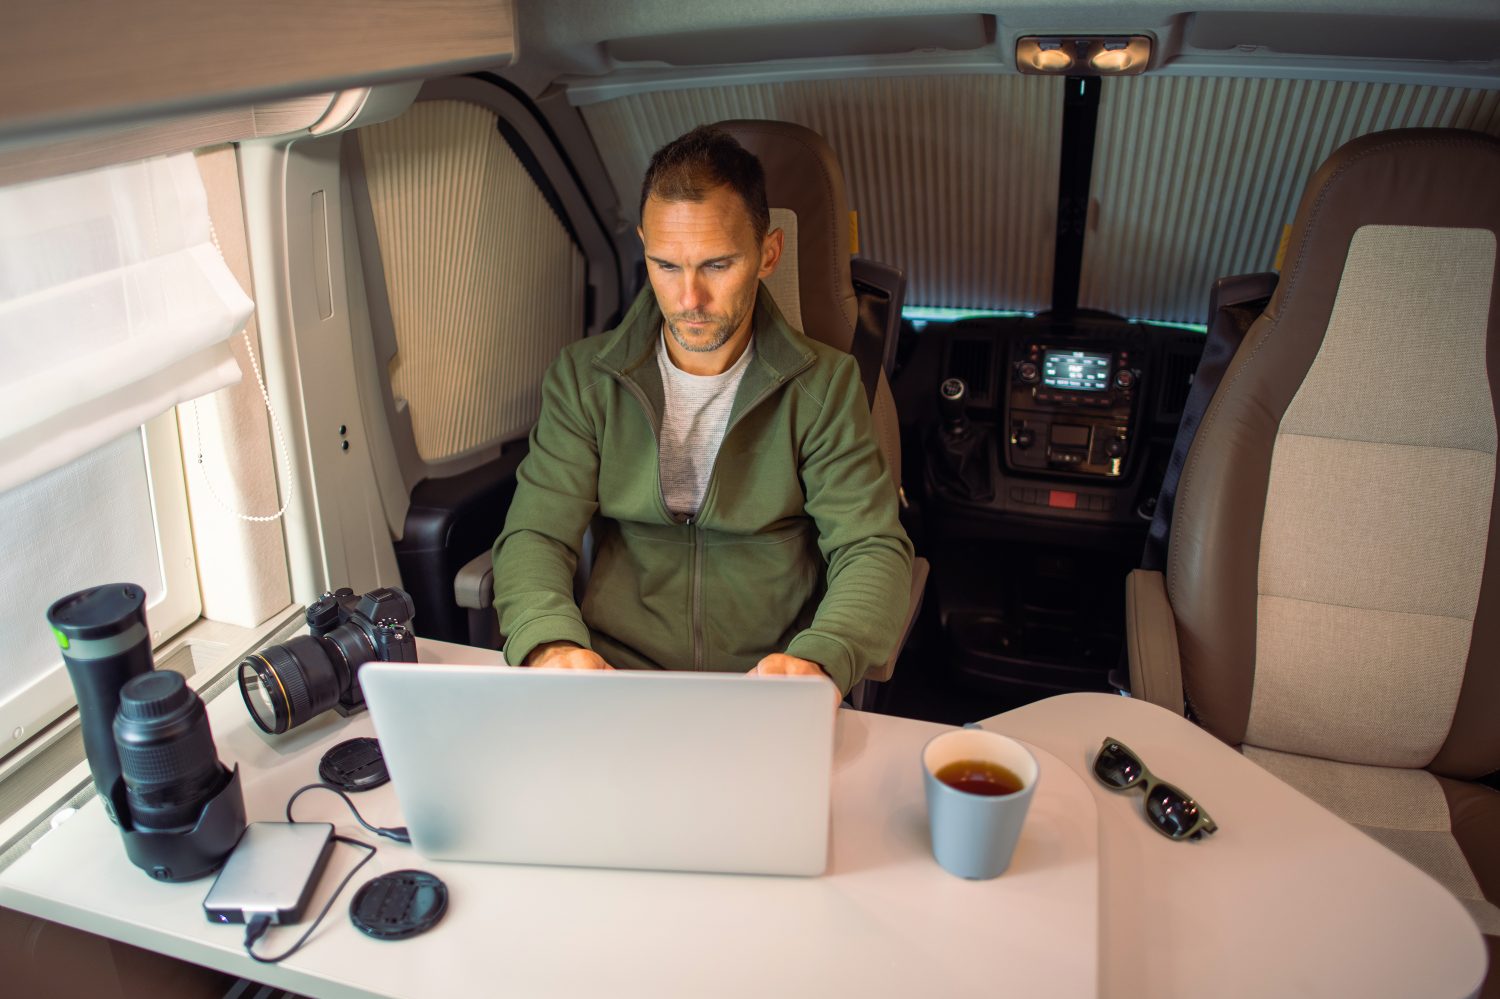 Man Working Remotely Getting Paid to Travel From Camper Van Using Internet Connection. Work and Travel Possibilities Theme